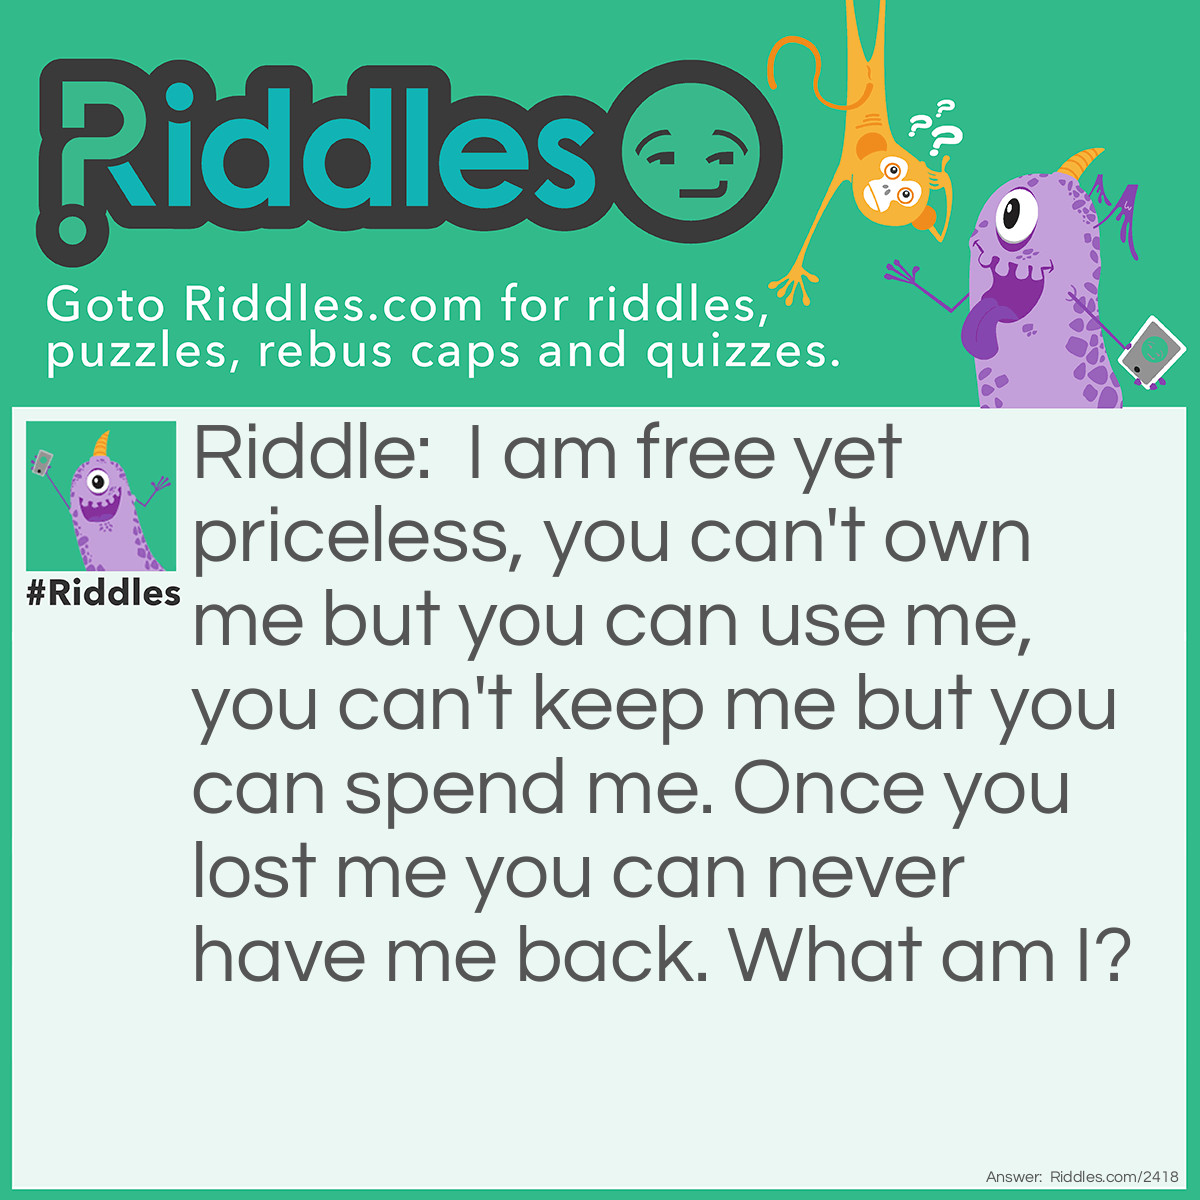 Riddle: I am free yet priceless, you can't own me but you can use me, you can't keep me but you can spend me. Once you lost me you can never have me back. What am I? Answer: Time.